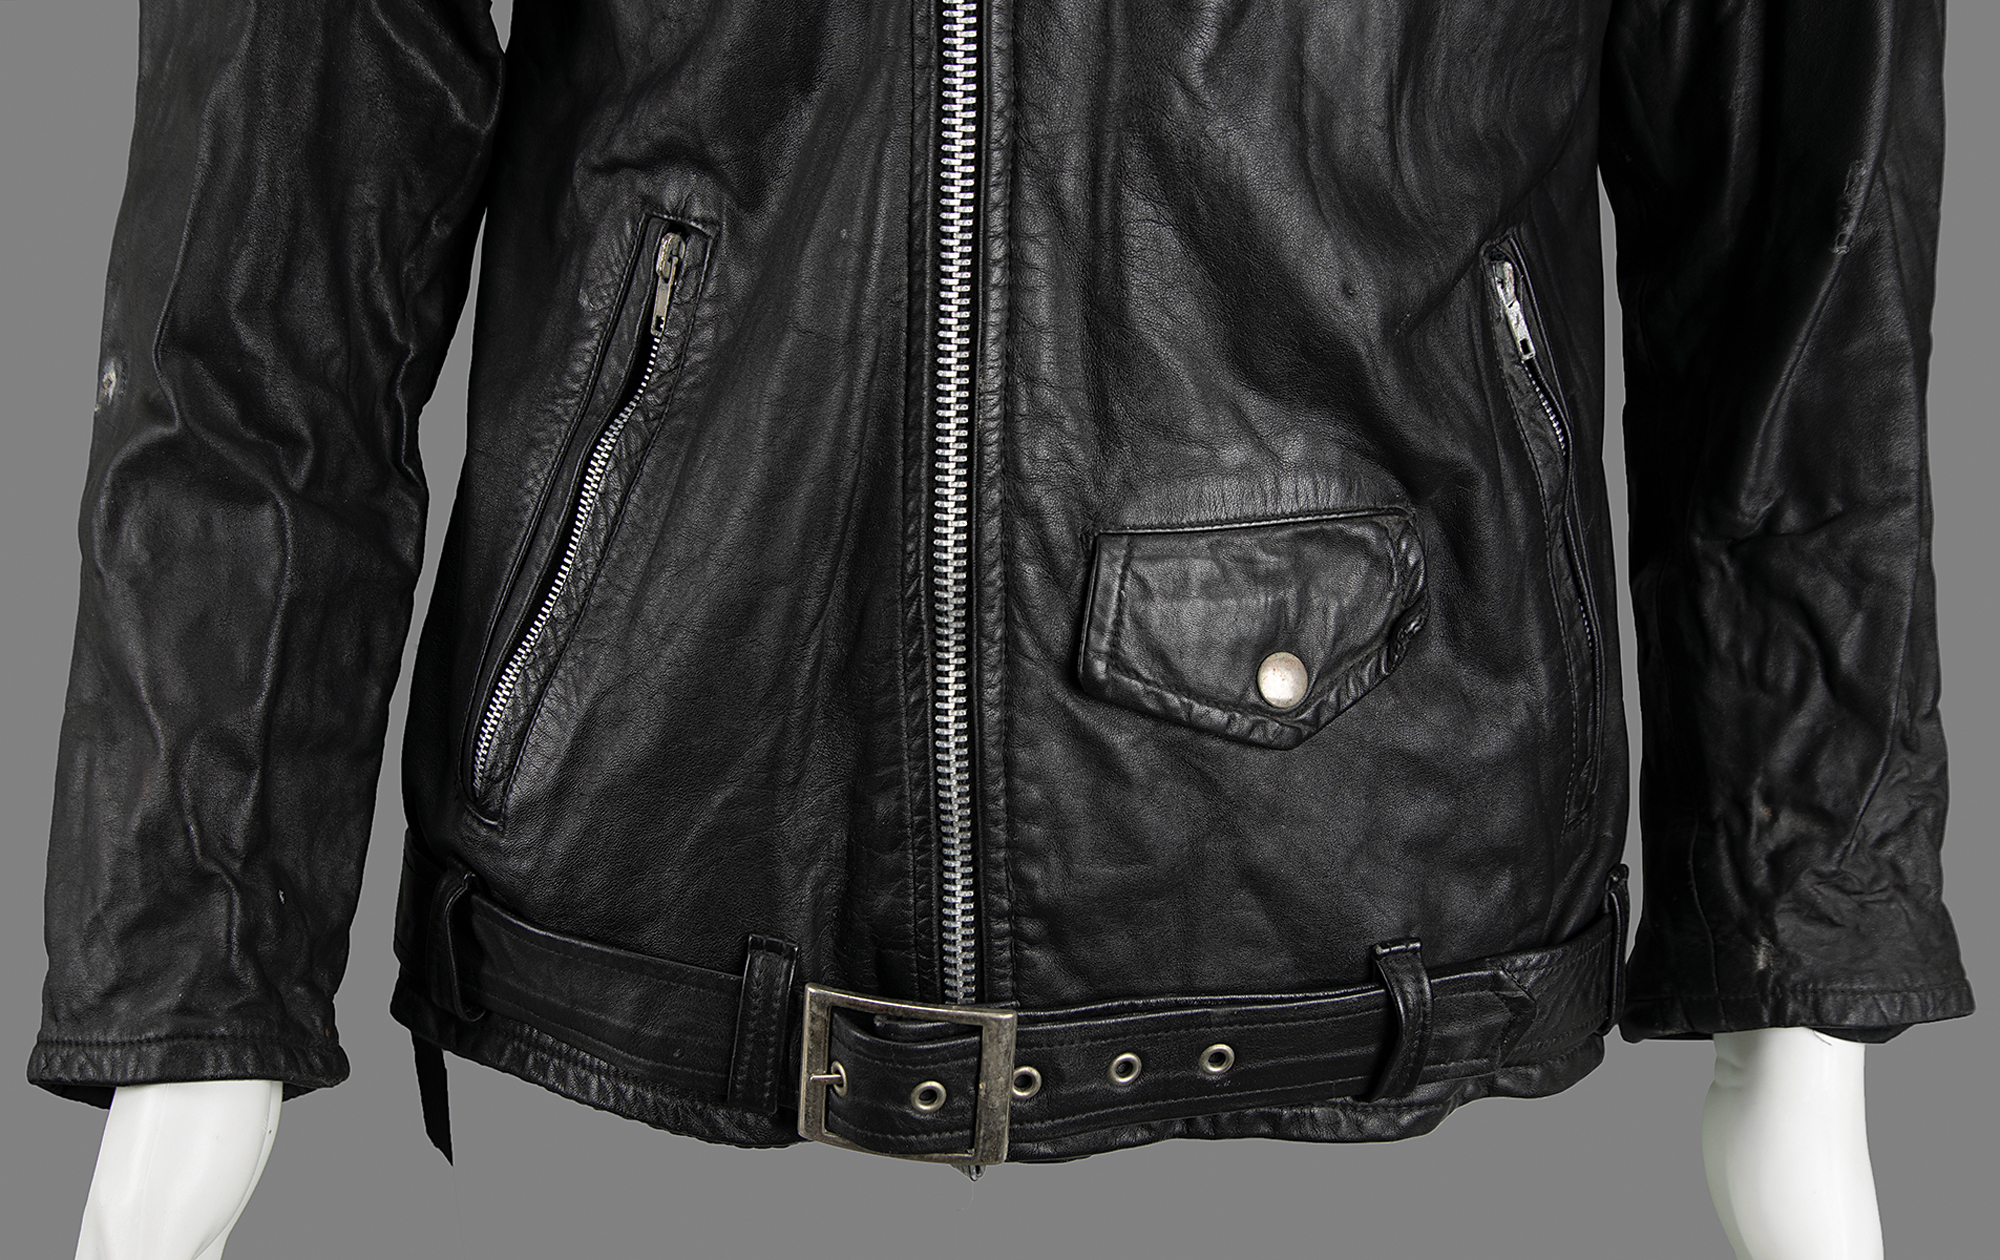 Joey Ramone's Stage-Worn Leather Jacket | RR Auction